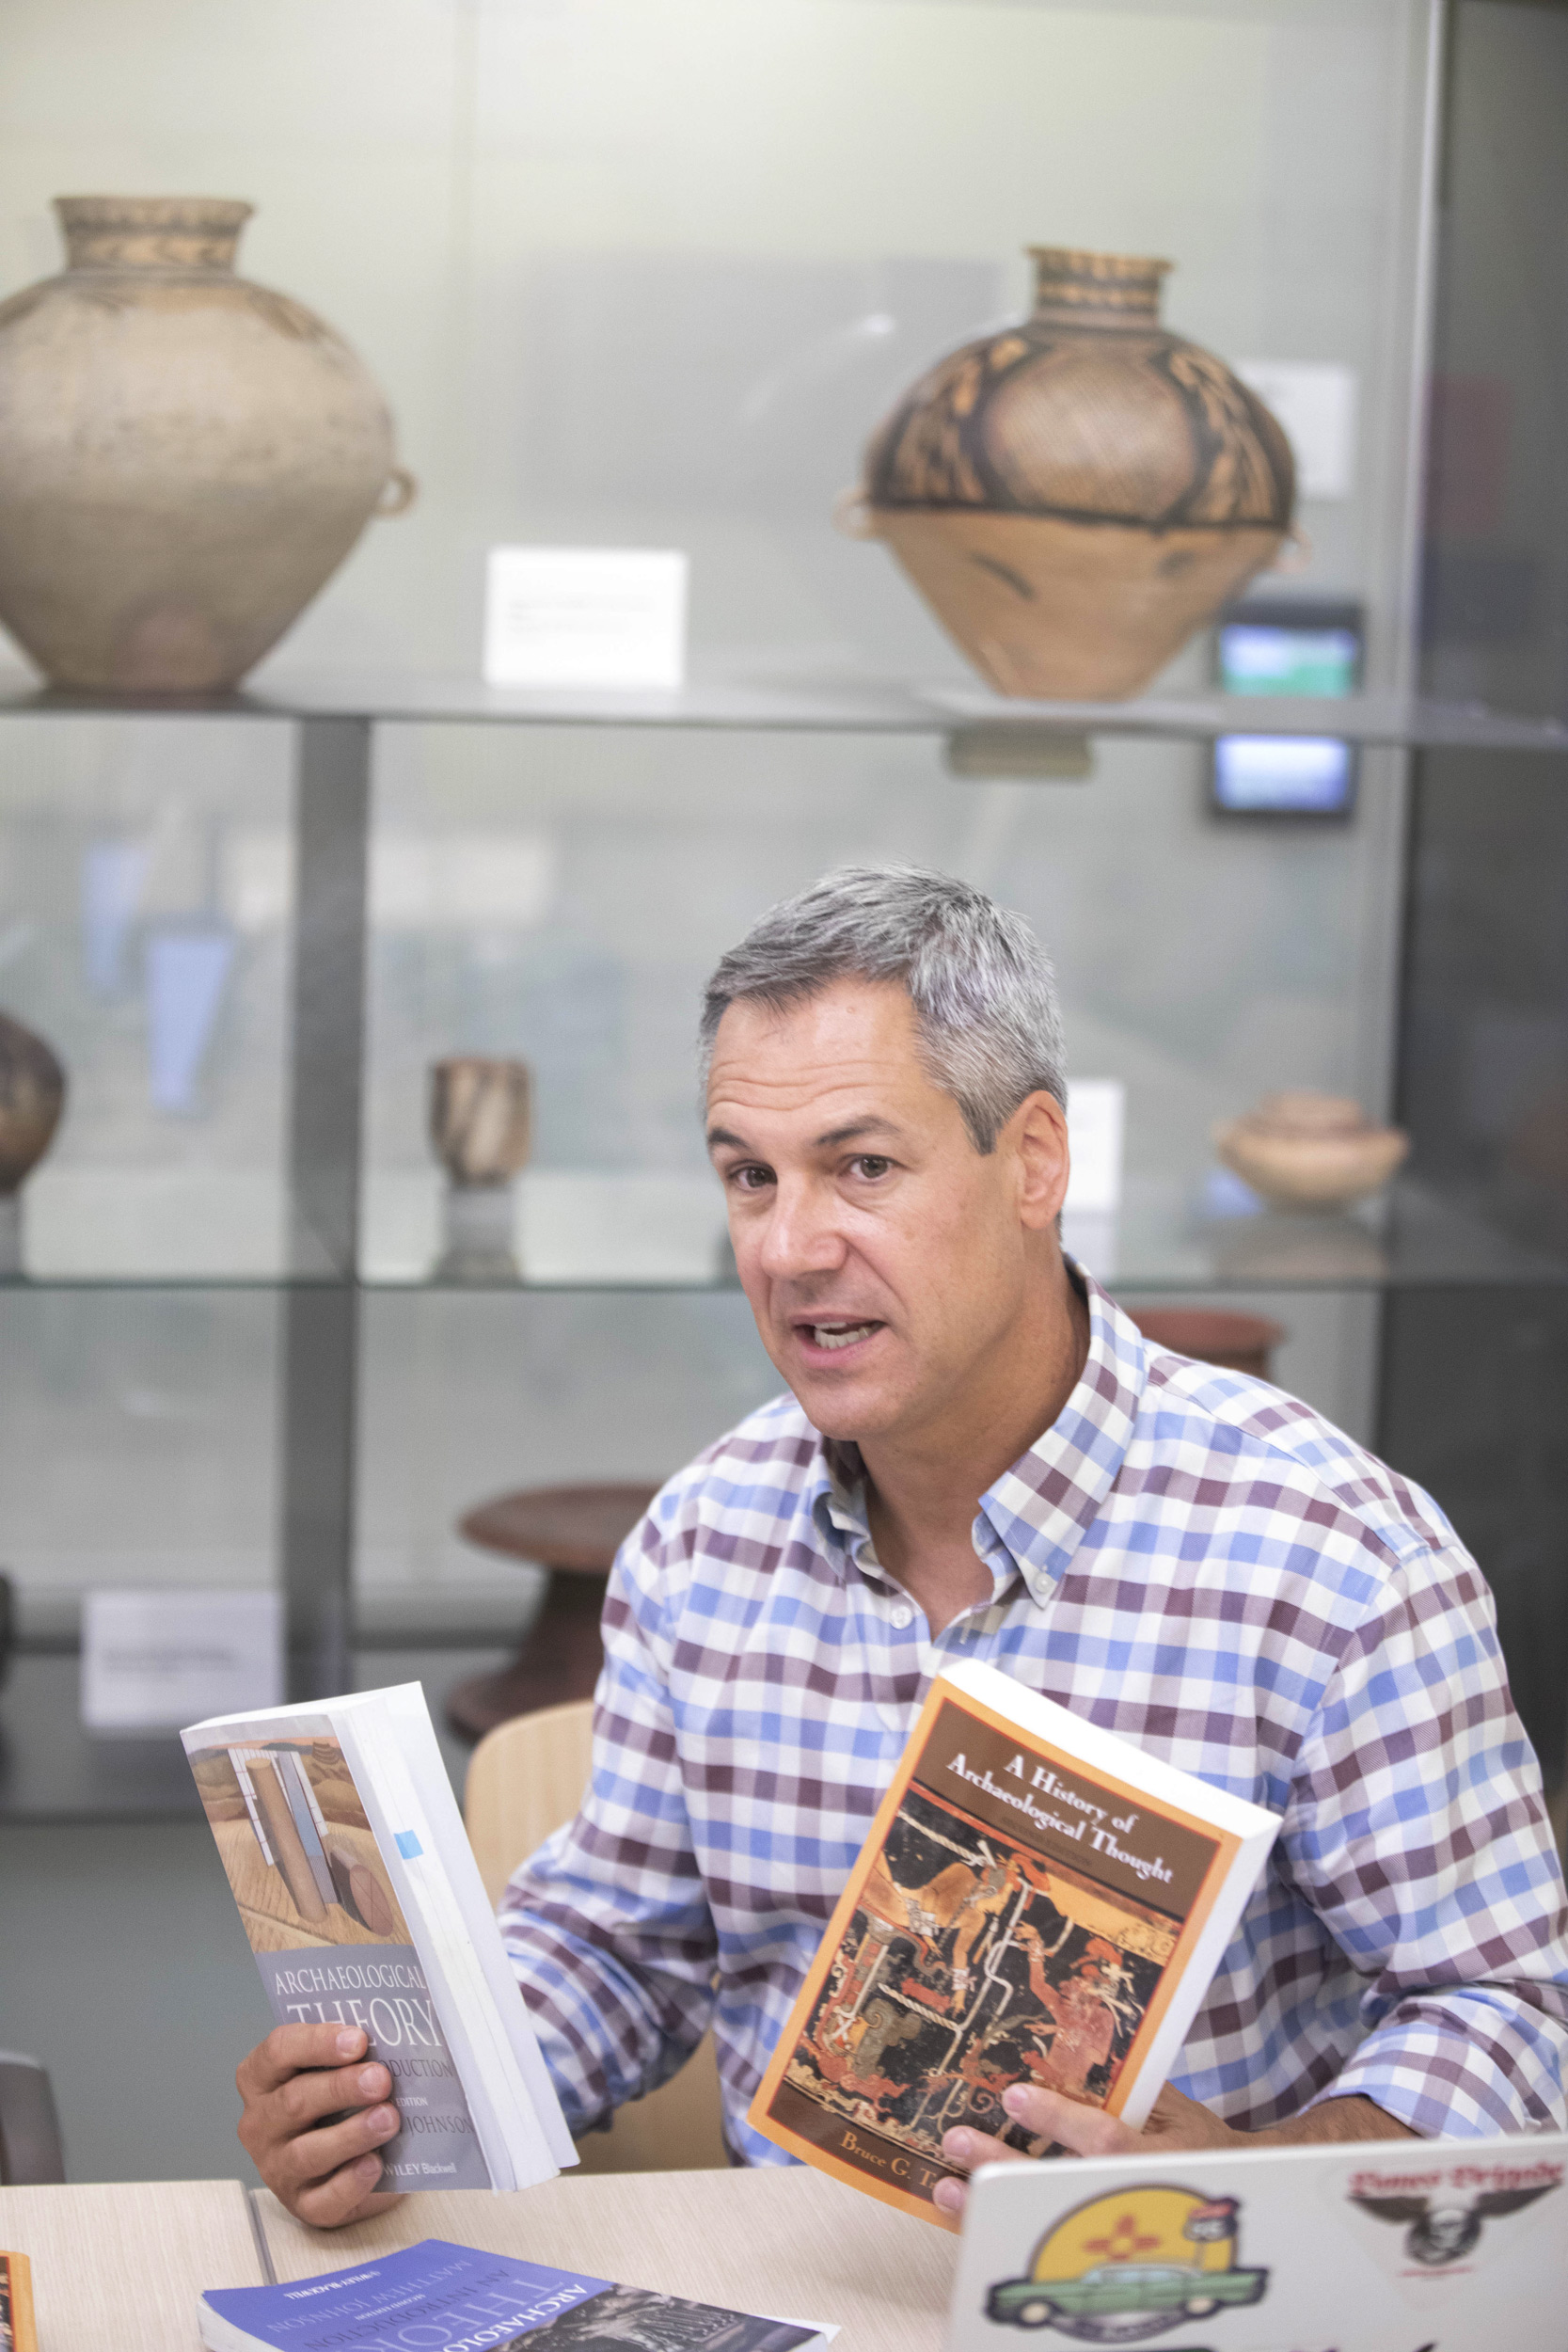 Matthew Liebmann, Peabody Professor of American Archaeology and Ethnology, teaches “Archaeological Method and Theory” in the Peabody Museum.